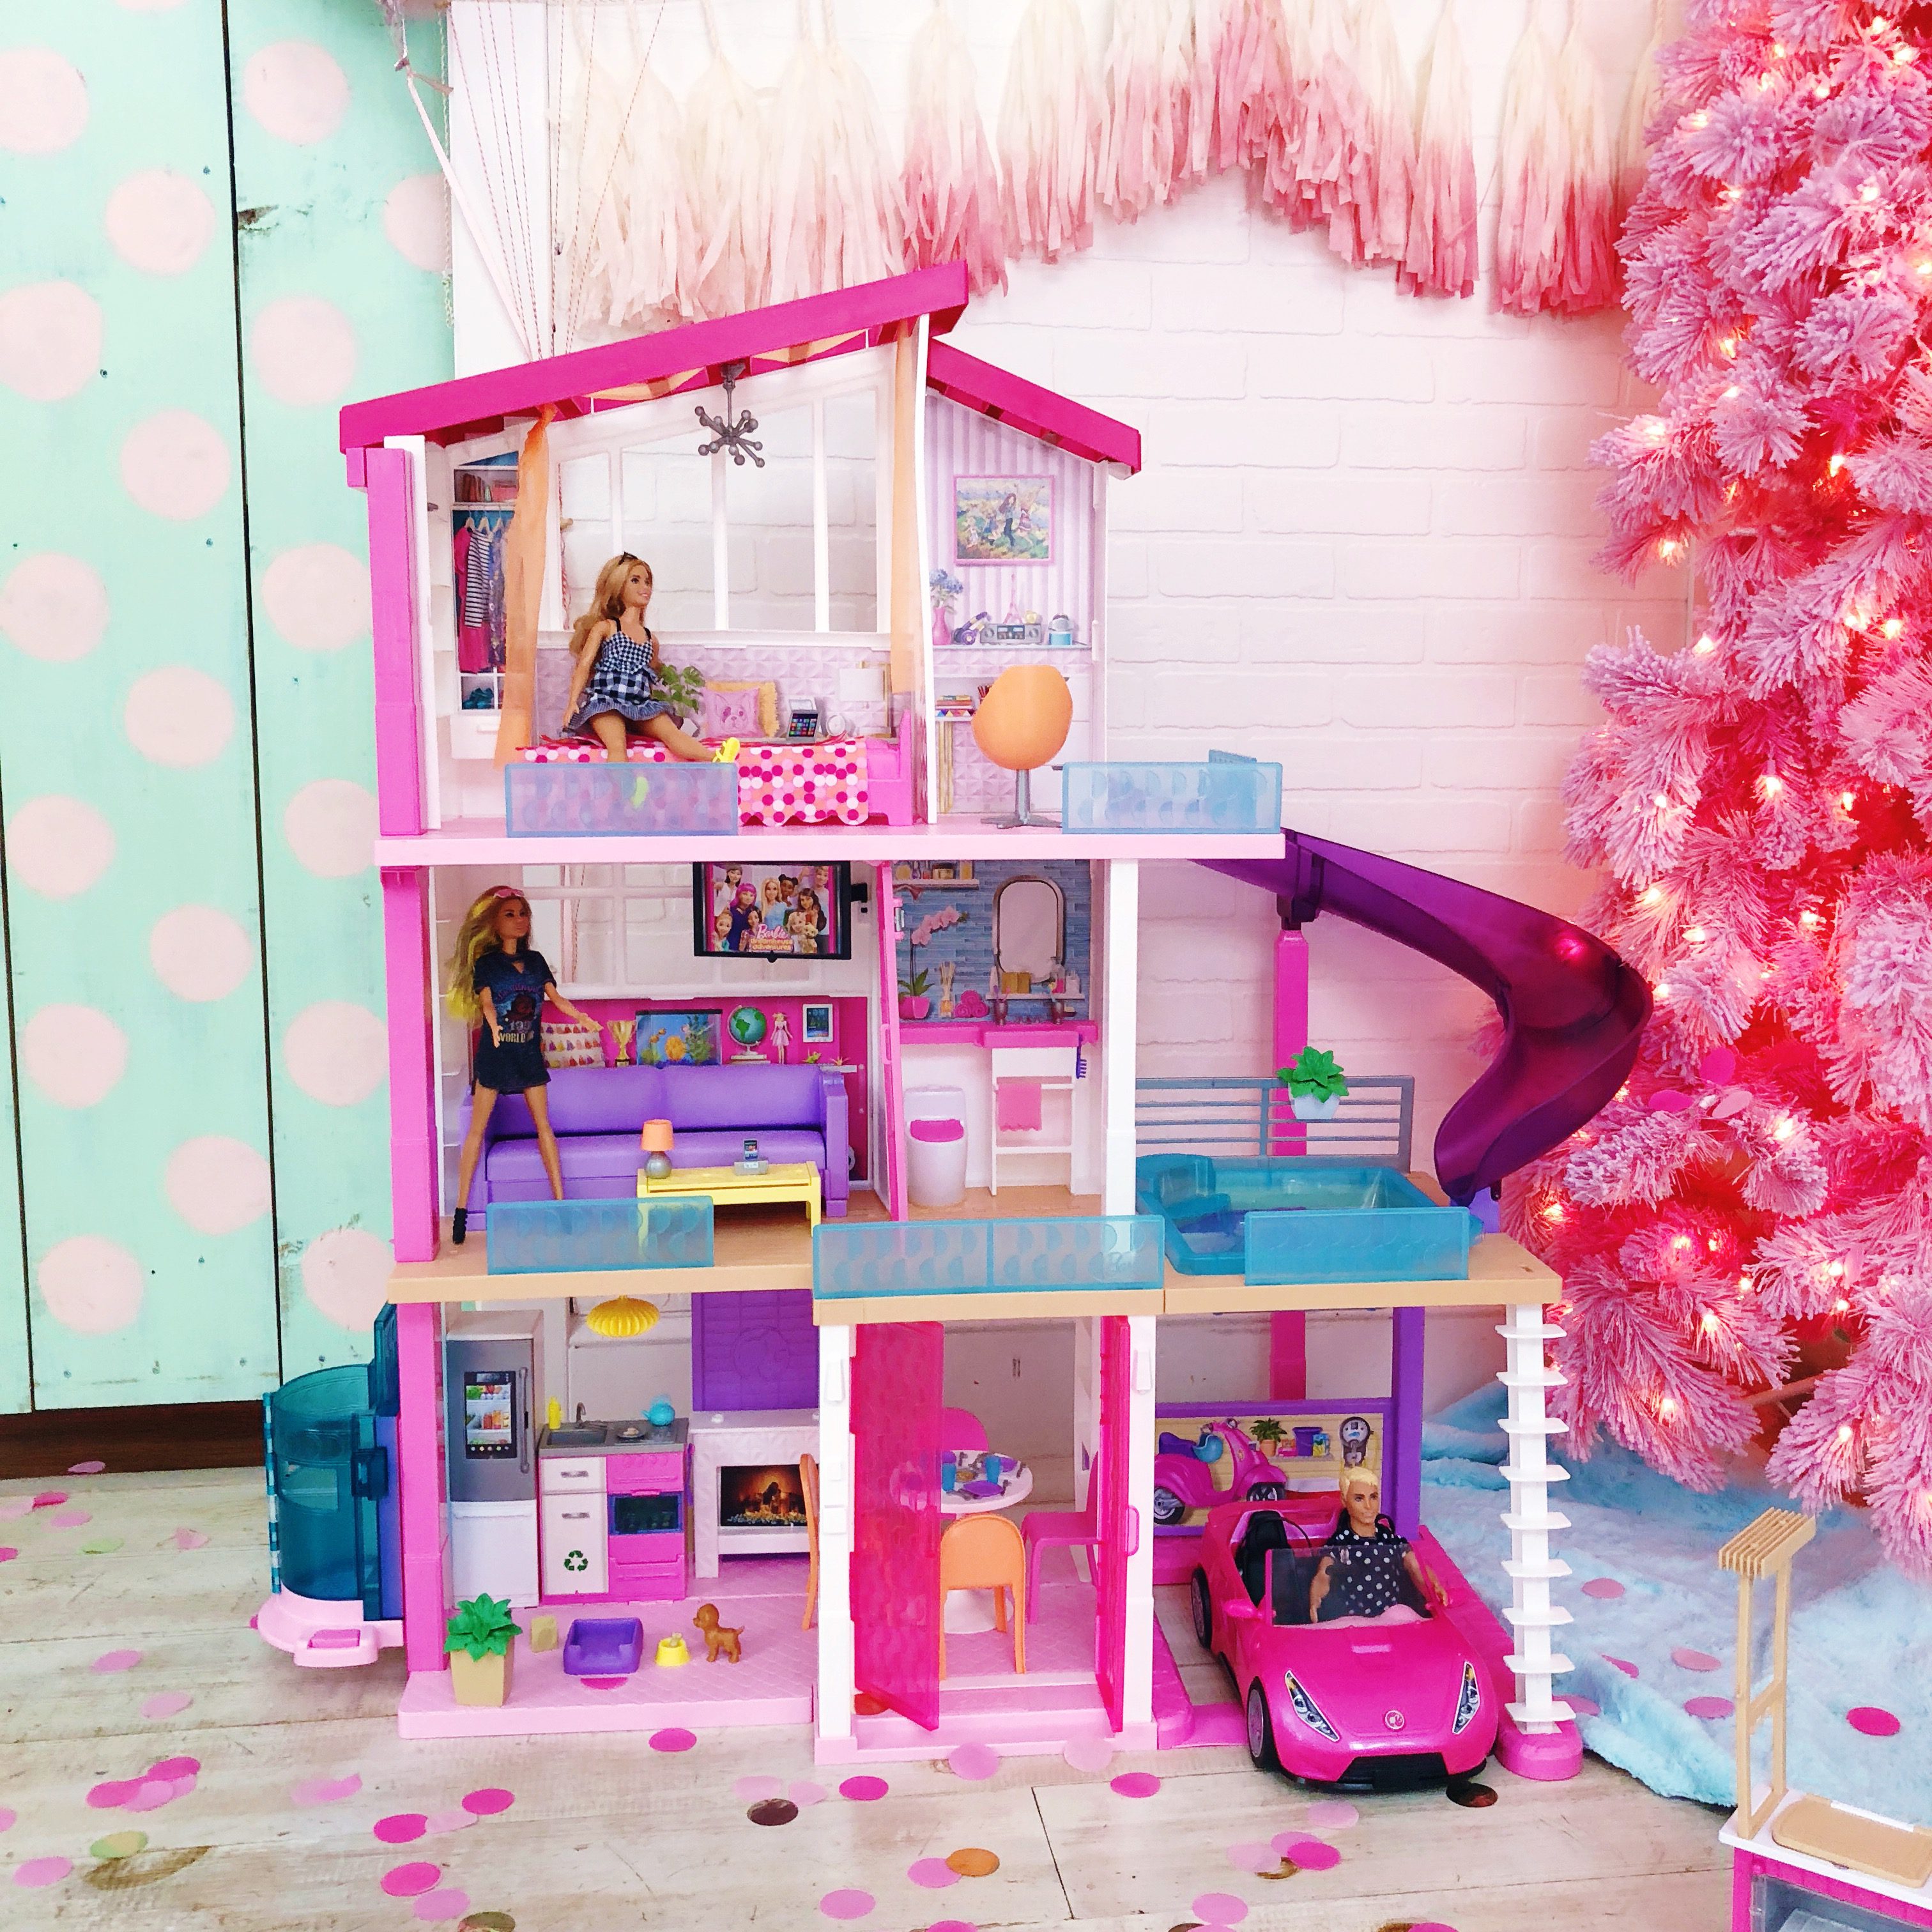 i want to watch barbie life in the dreamhouse